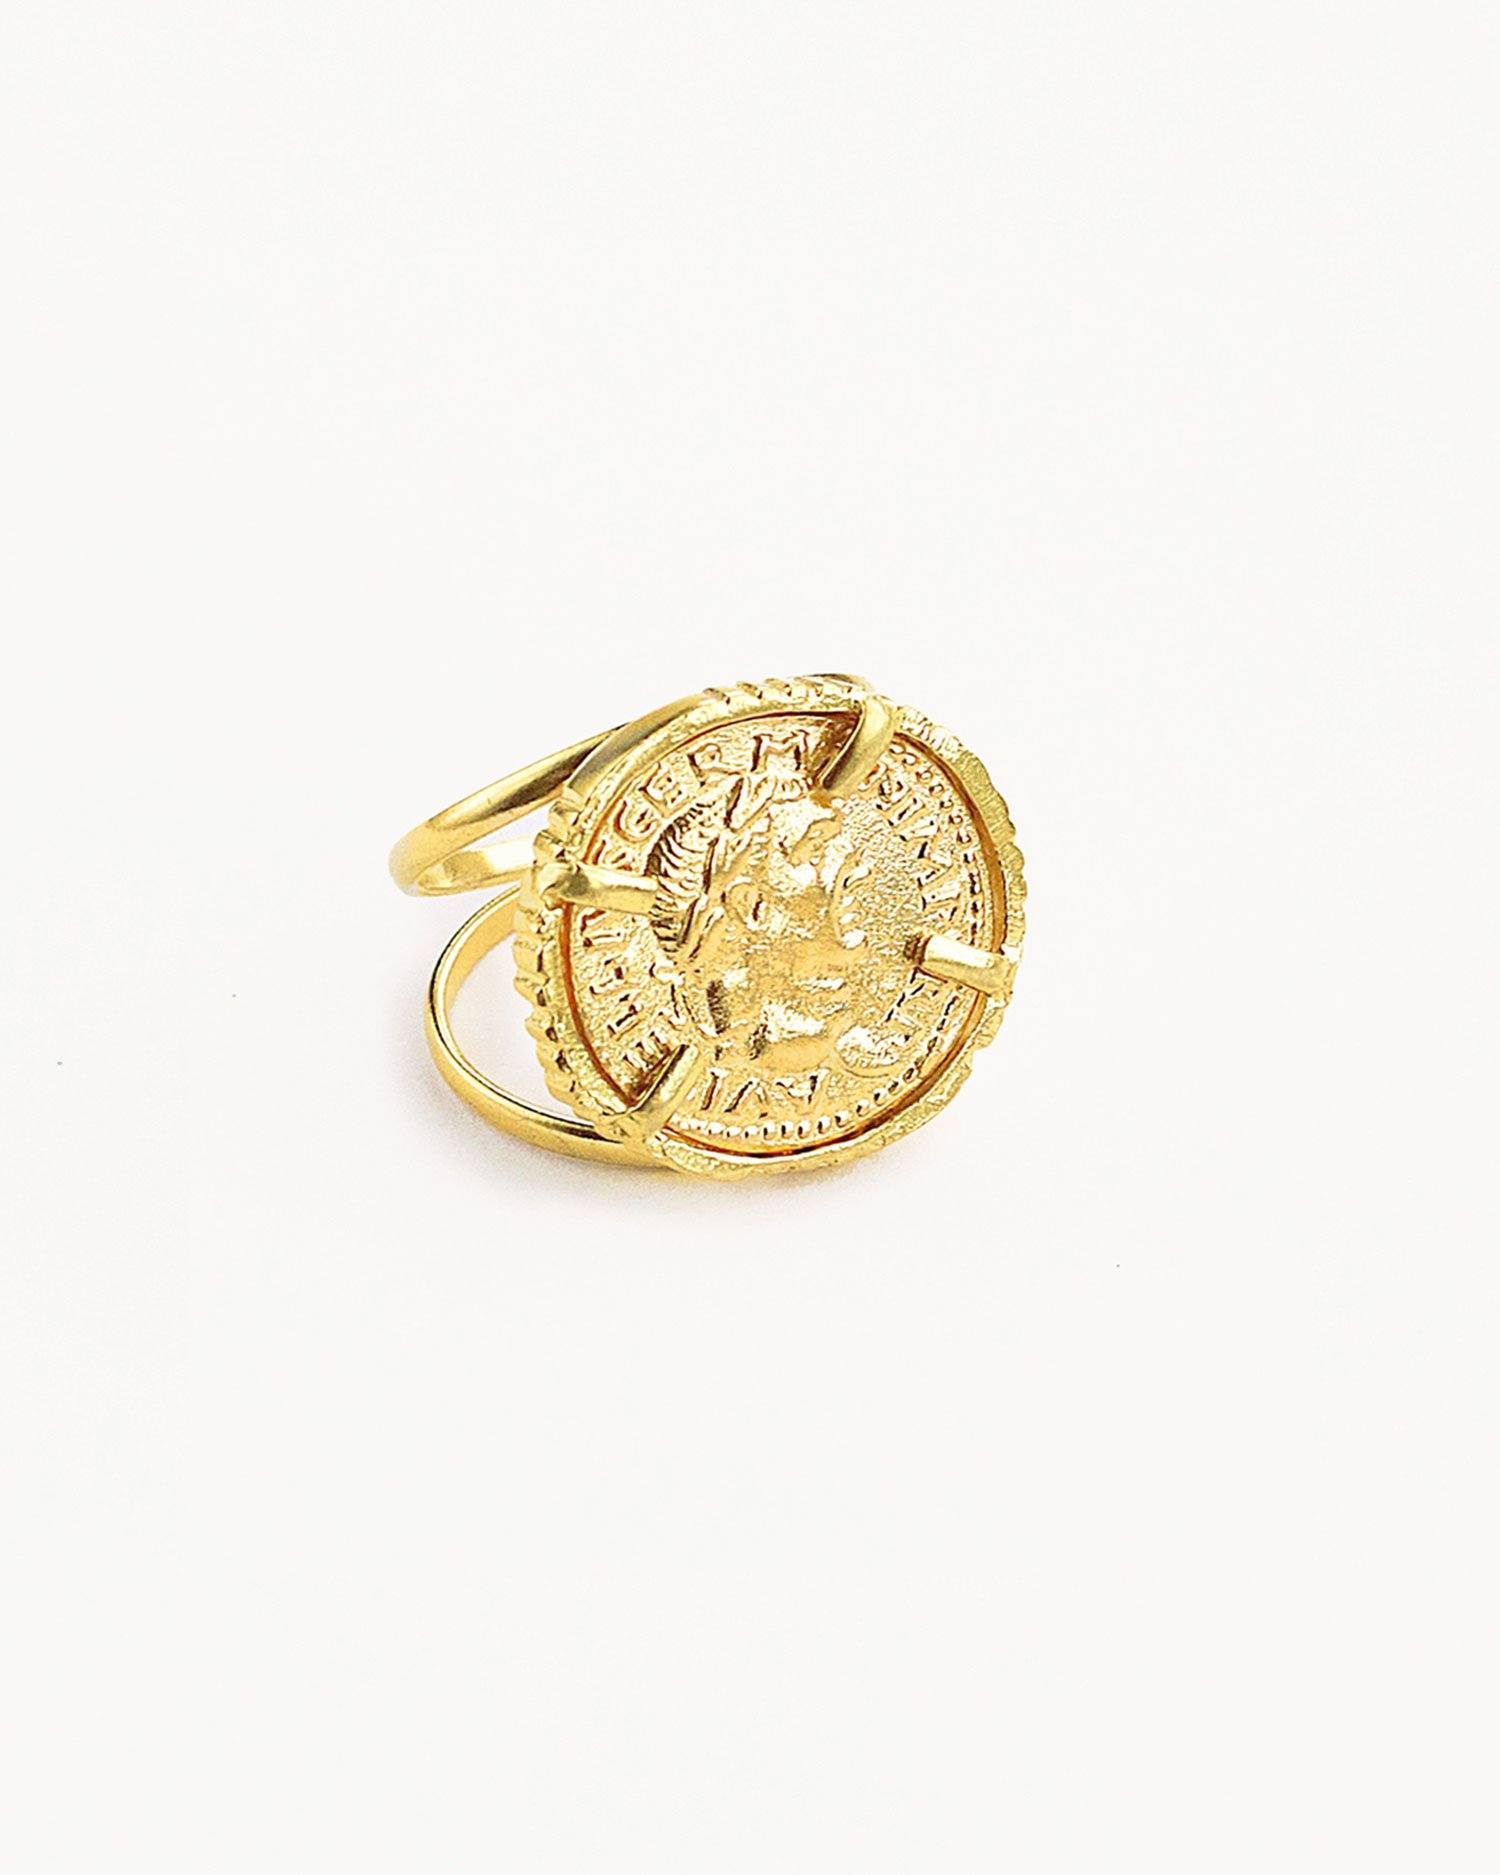 Cezar Gold Coin Double Band Cocktail Ring | Sustainable Jewellery by Ottoman Hands